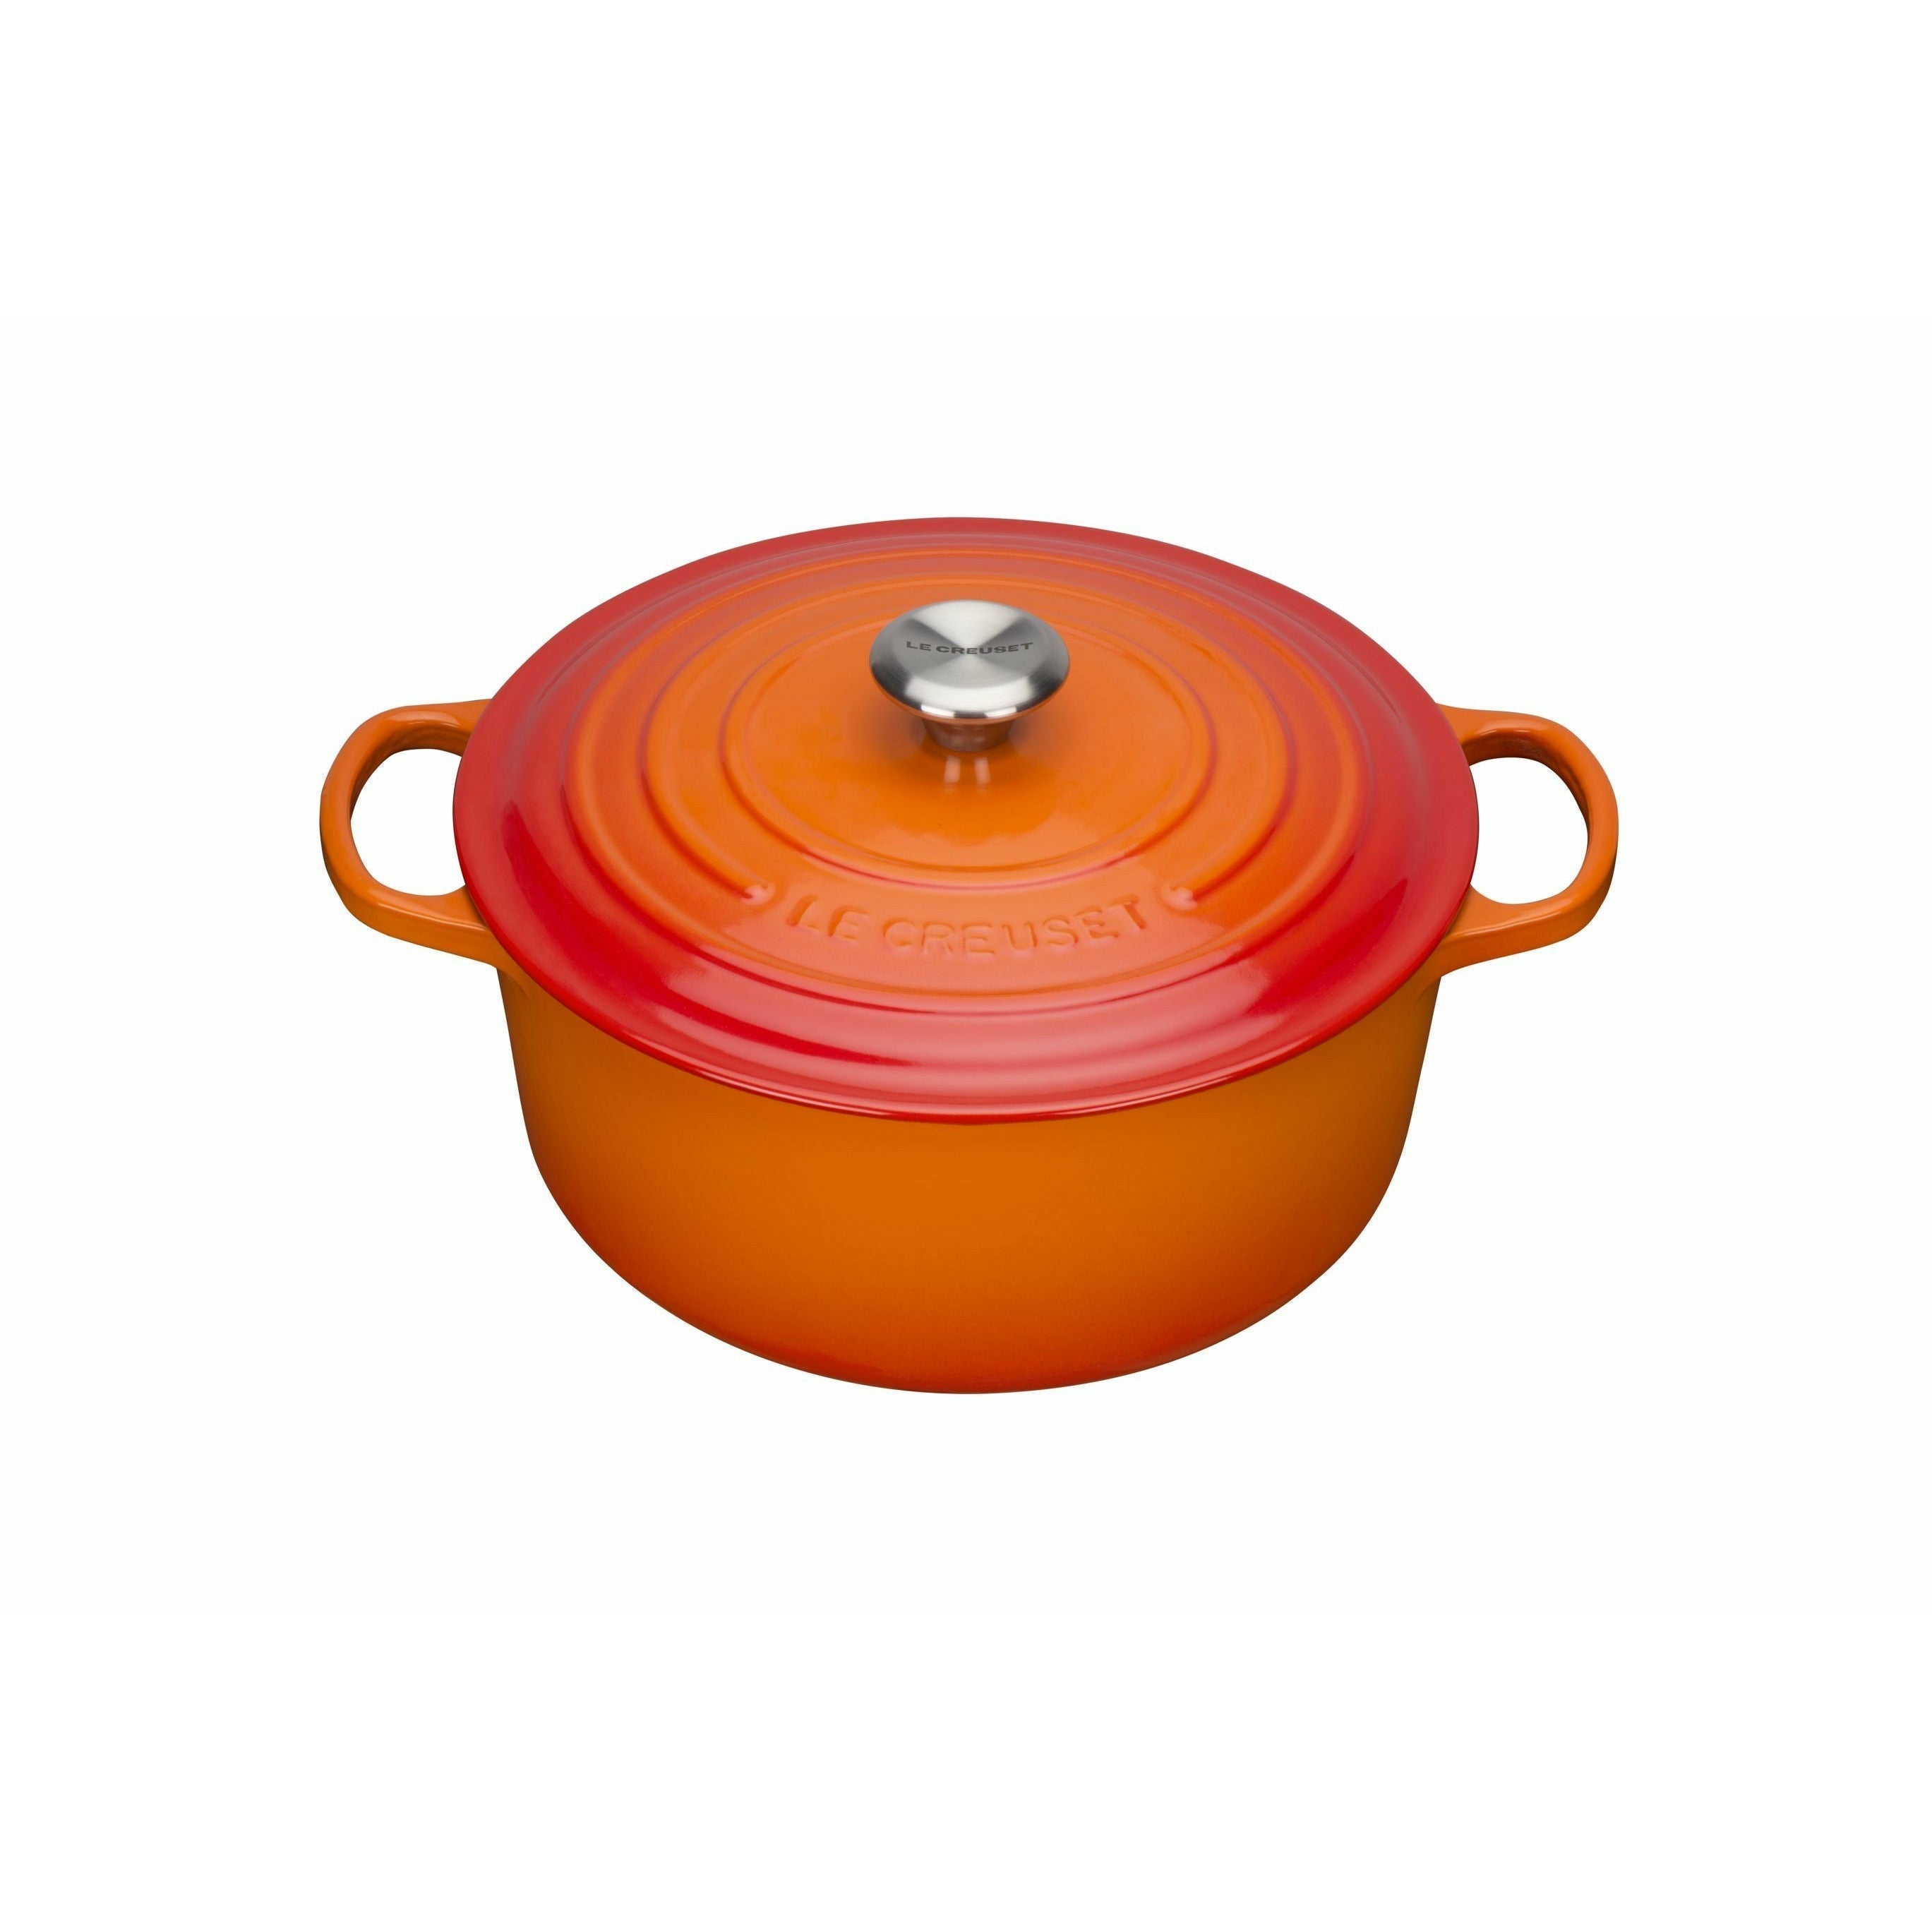 Le Creuset Signature Round Roaster 26 cm, oven rood